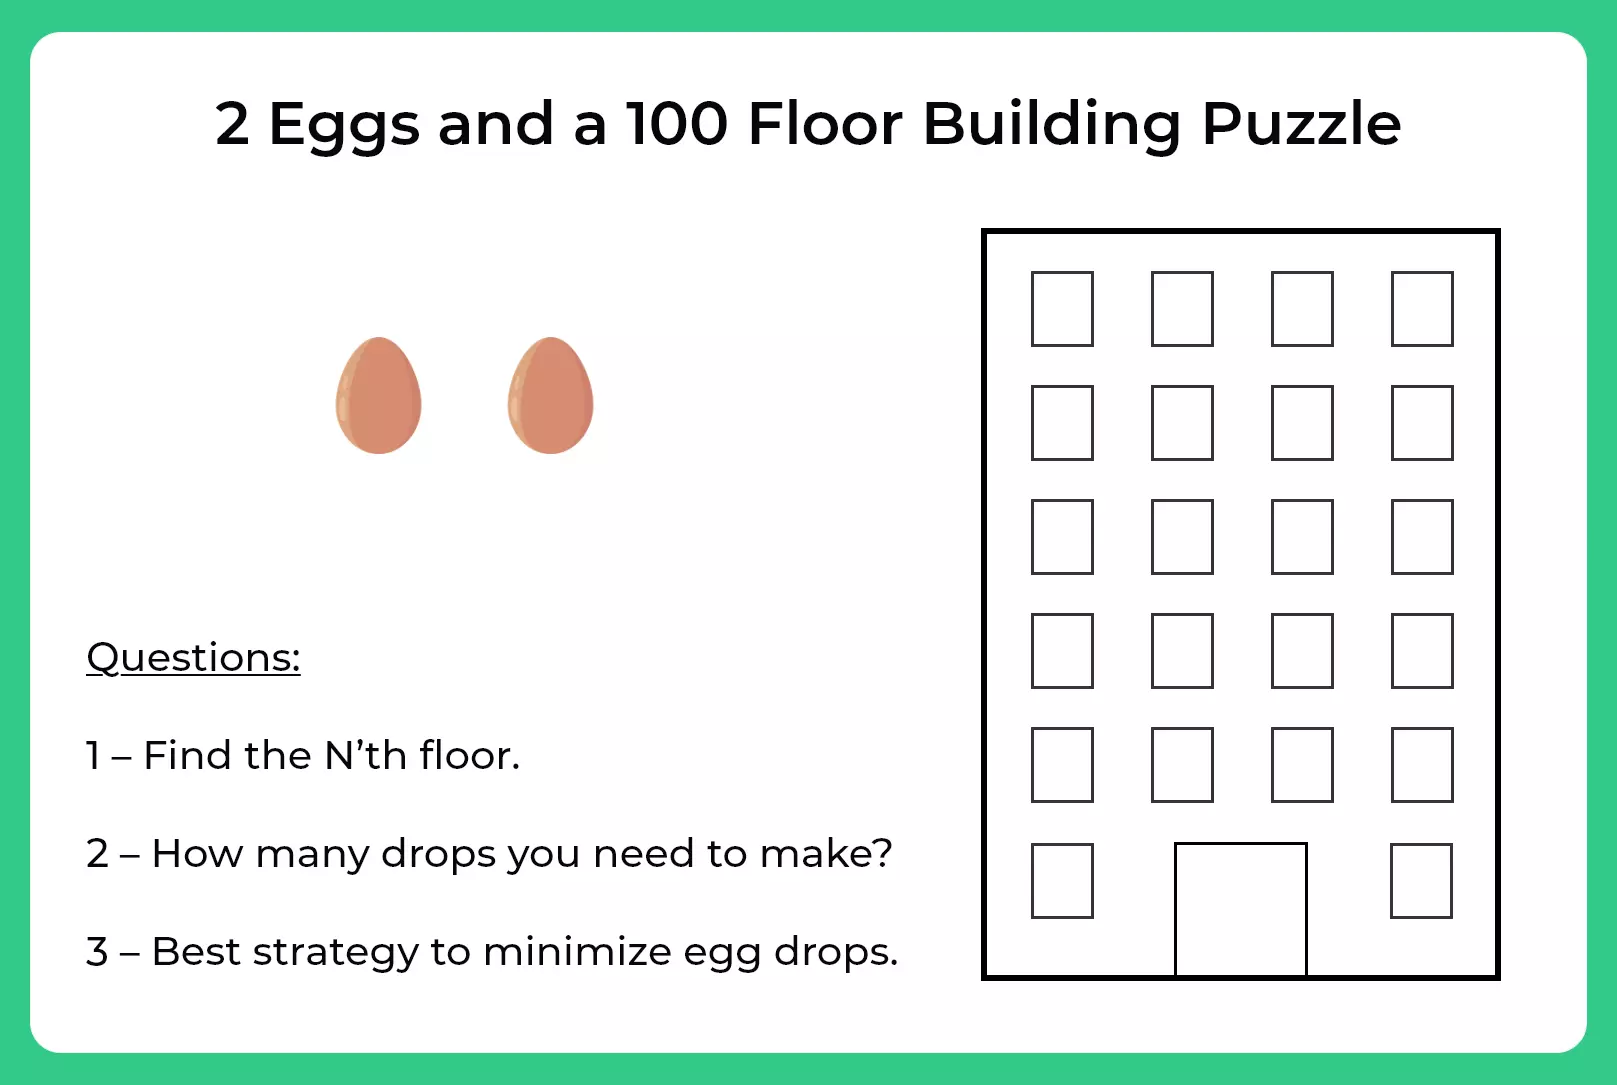 2 eggs and 100 floors building puzzle